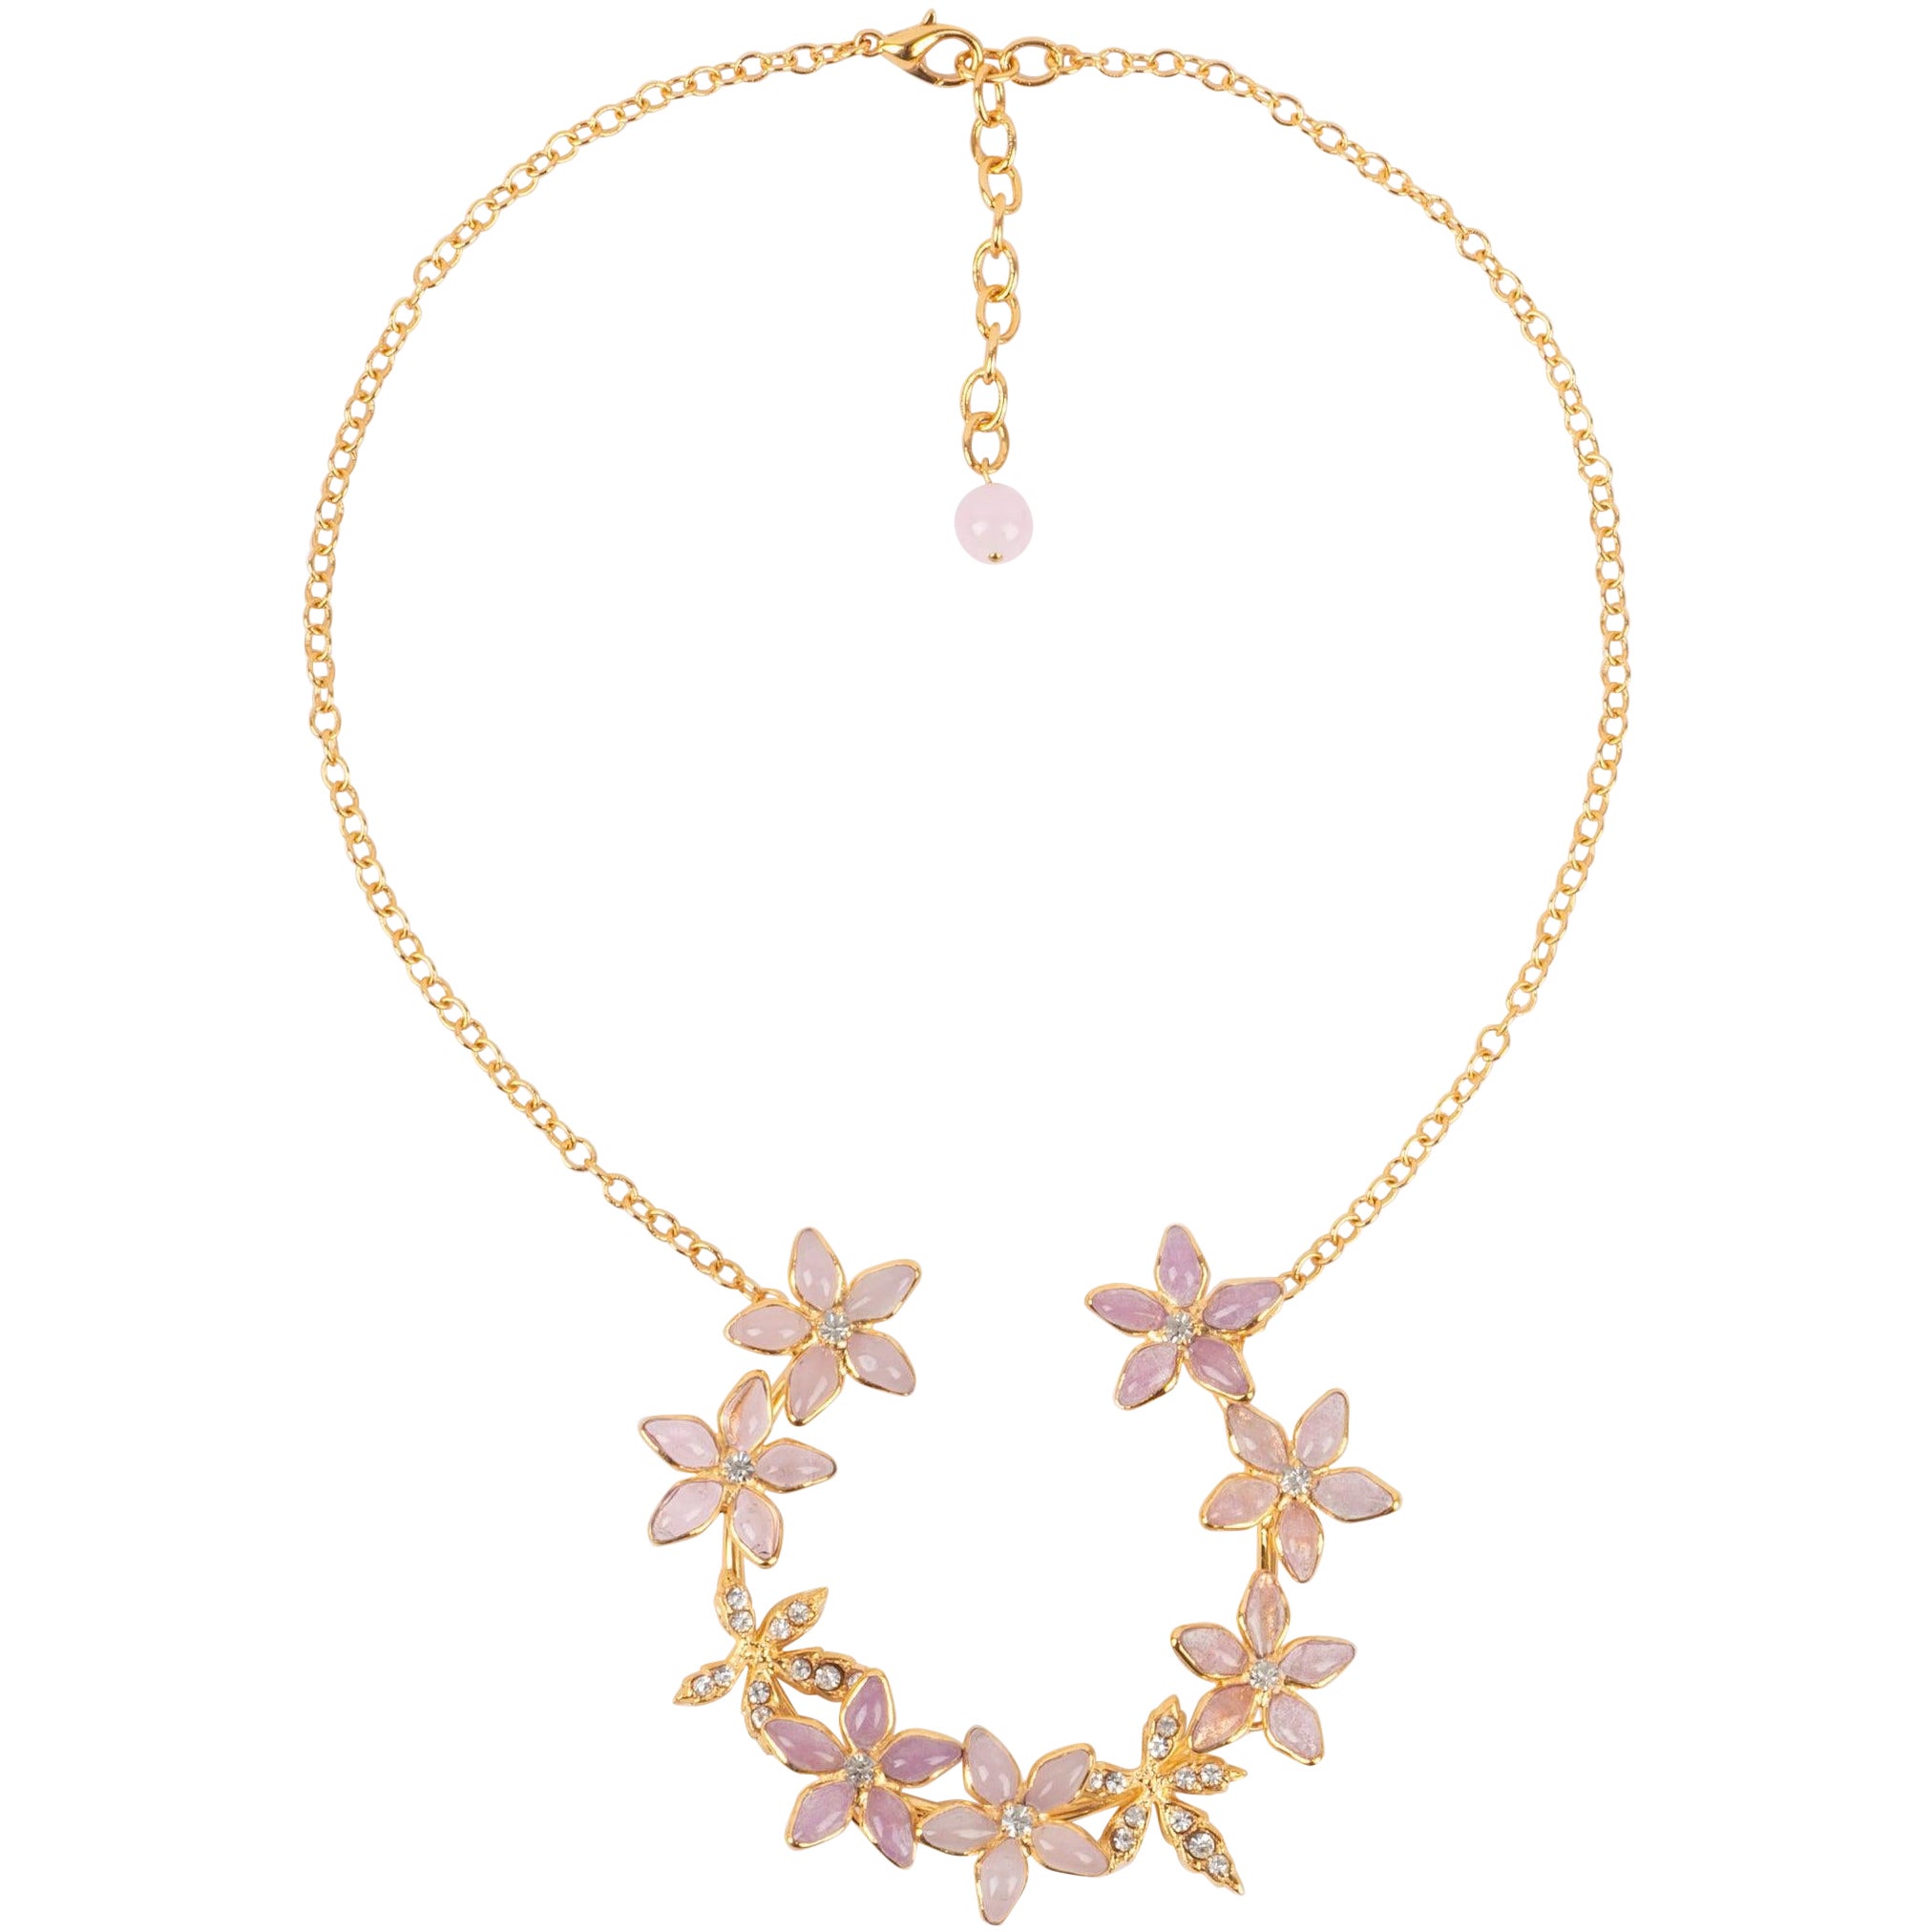 Augustine Golden Metal Necklace with Rhinestones and Glass Paste Pale Pink Tones For Sale